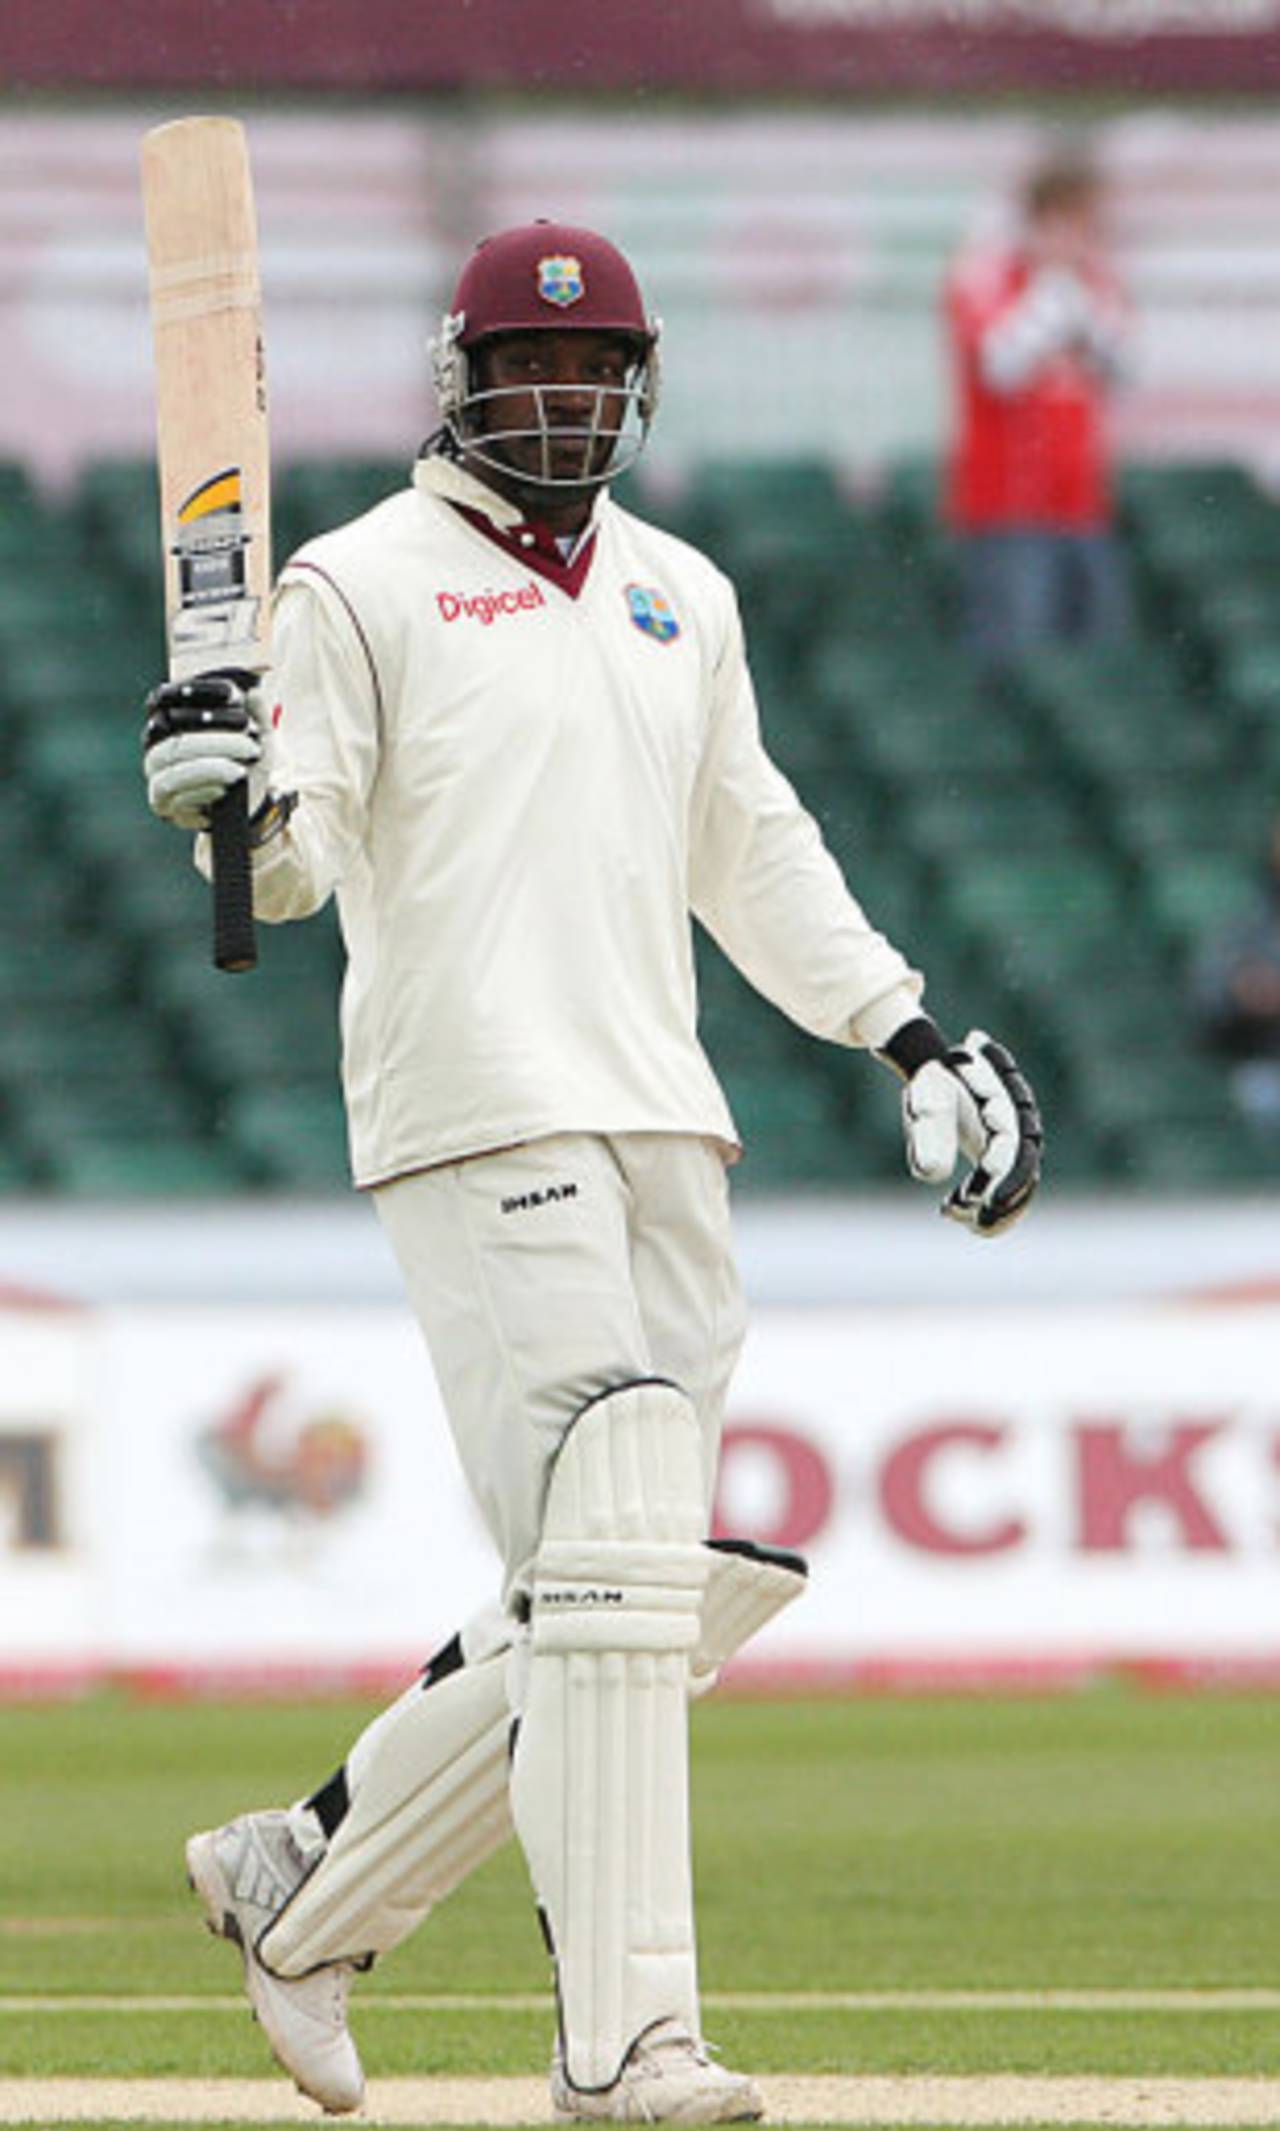 Chris Gayle raced to his half-century off 39 balls, England v West Indies, 2nd Test, Chester-le-Street, 4th day, May 17, 2009